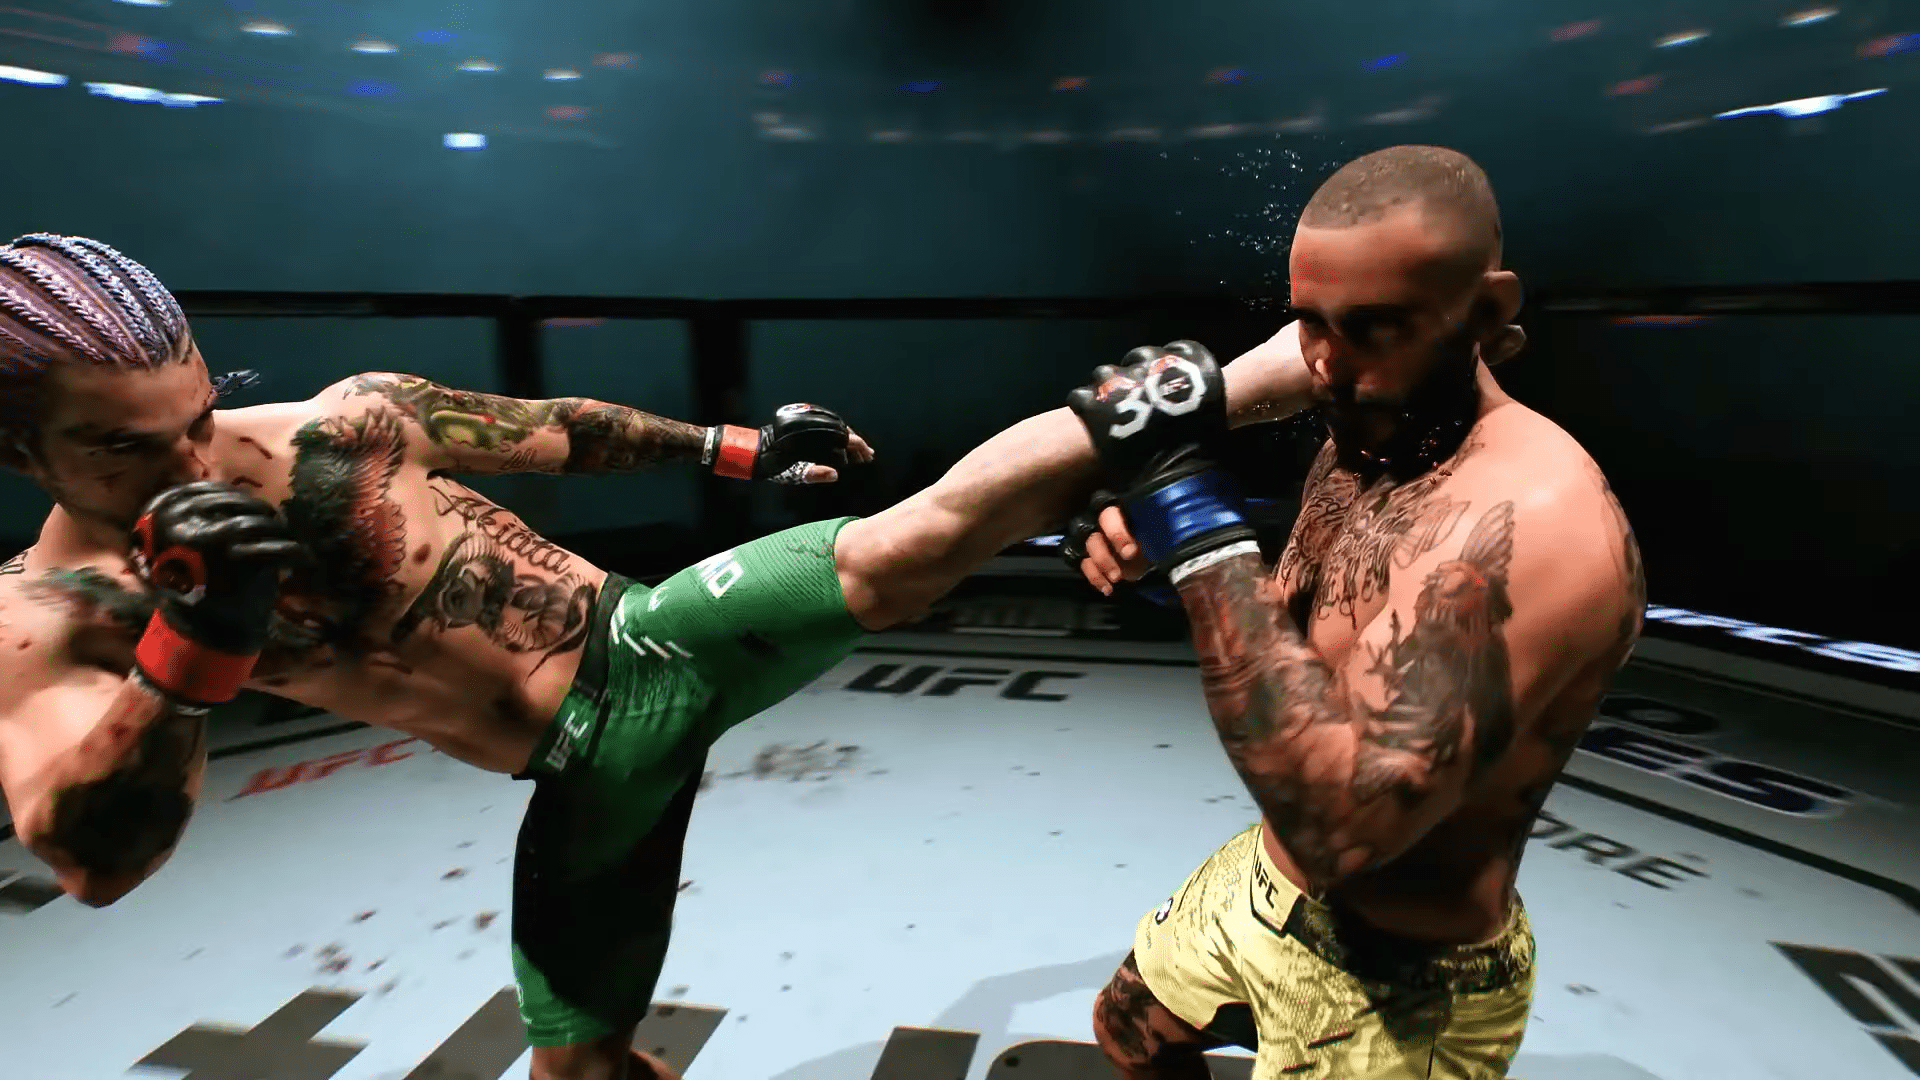 UFC 5 Deep Dive Gameplay Video Breaks Down What To Expect in the Ring: Damage System Detailed